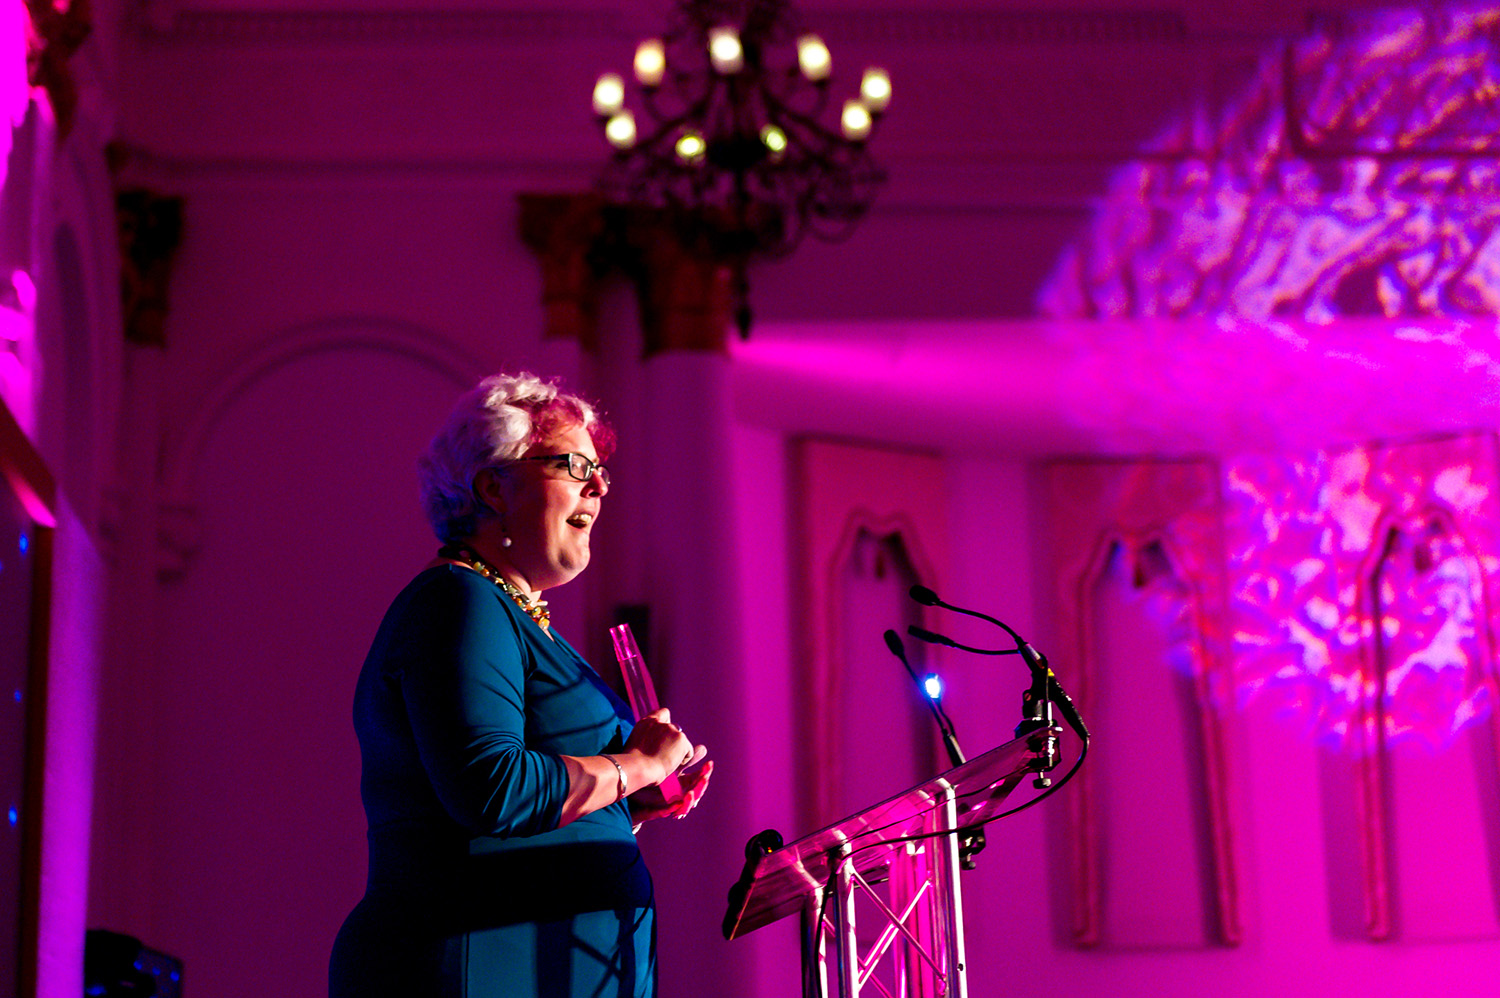 Jenni speaking at the dais in a hall lit by purple light